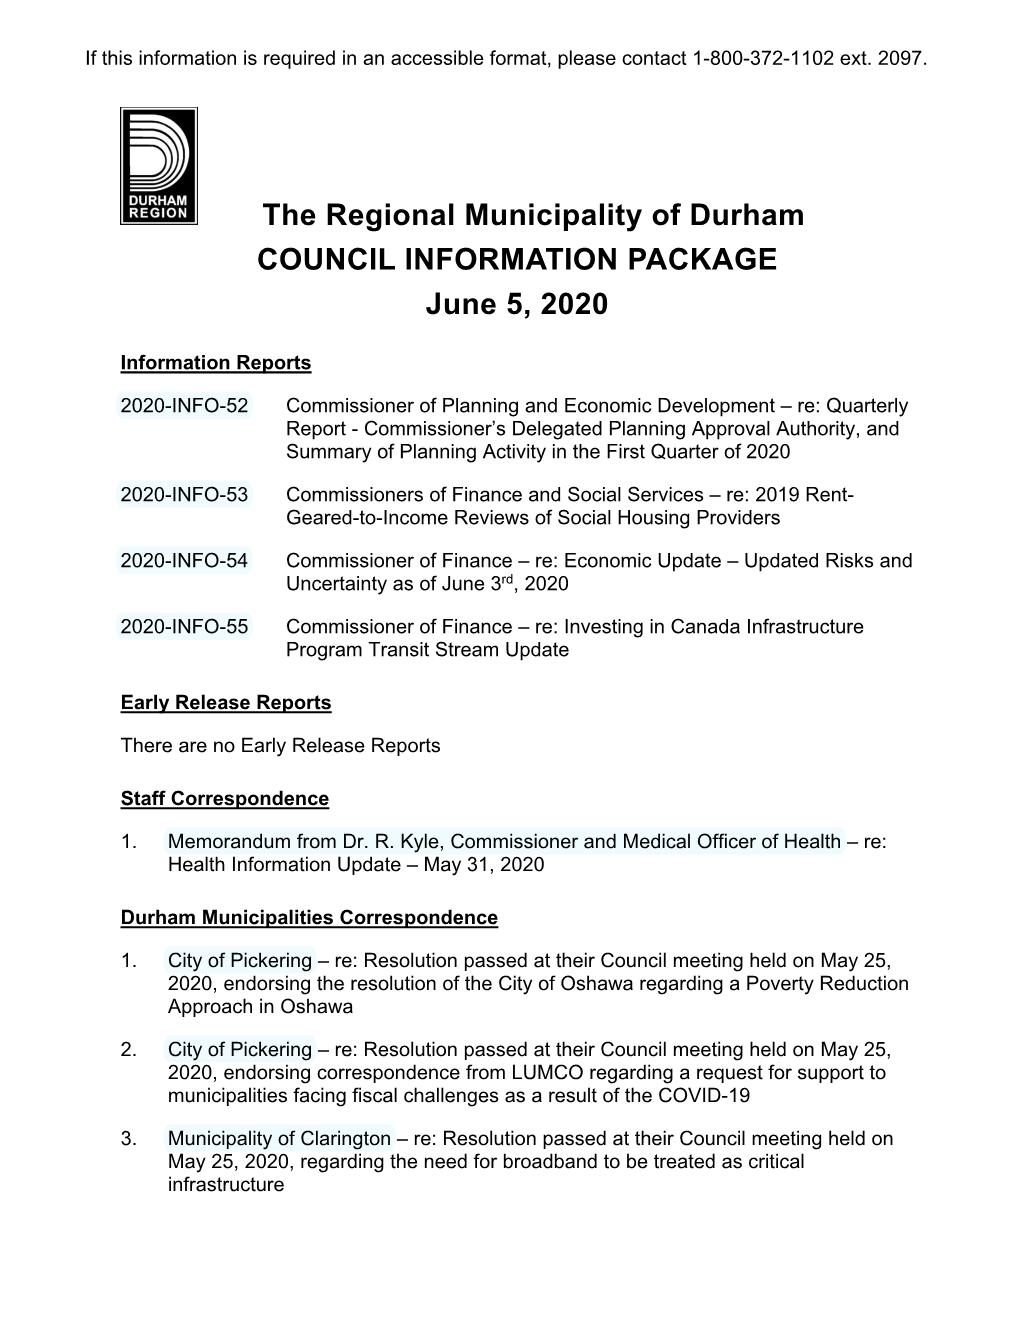 Council Information Package, June 5, 2020